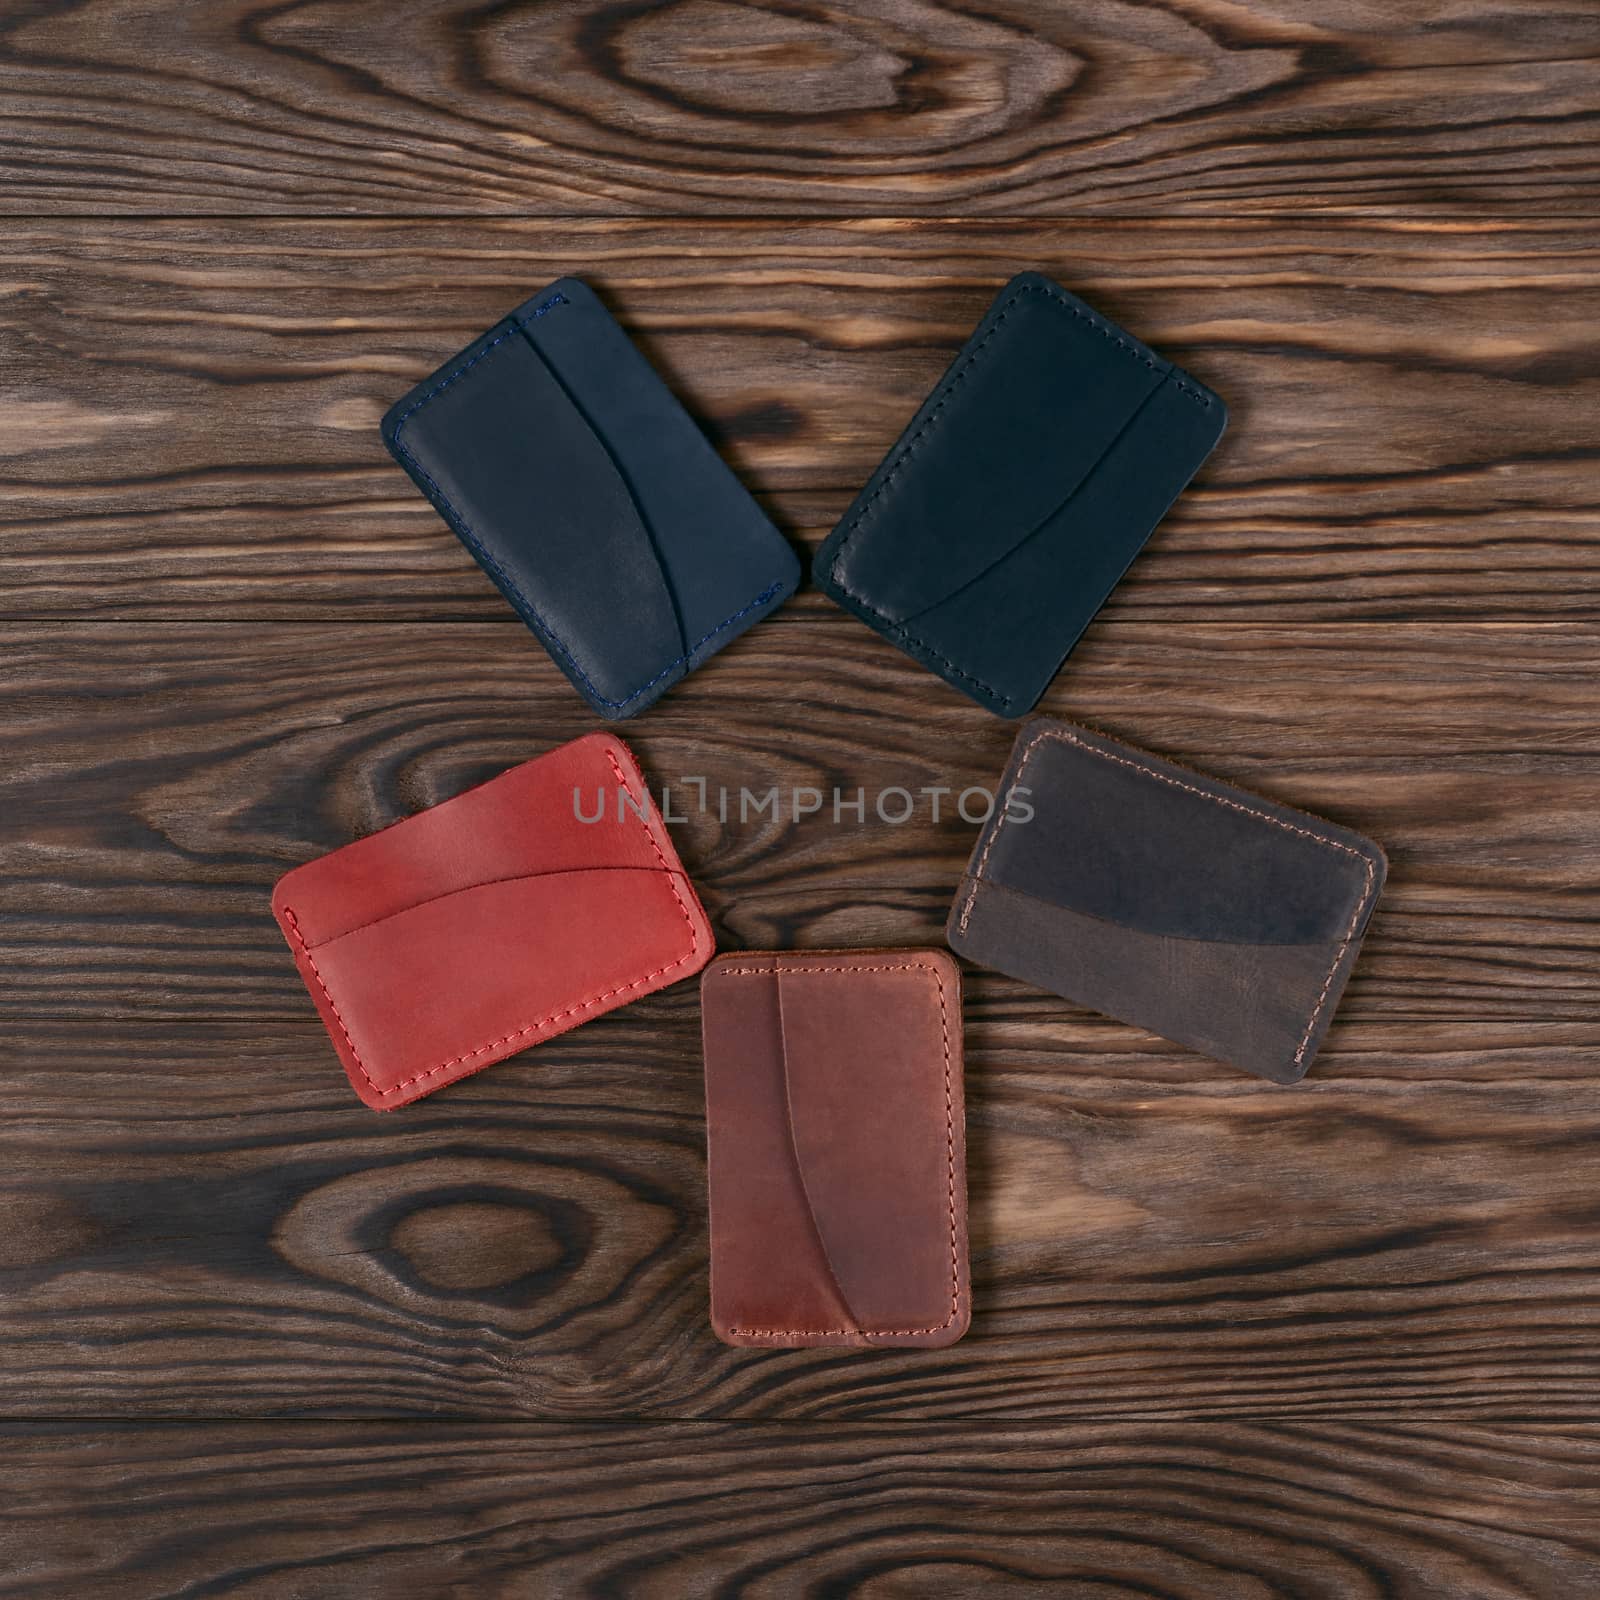 Five handmade leather cardholders on wooden background lie star shaped. Stock photo on perfect wooden background. Blue, black, brown, ginger and red items on photo.